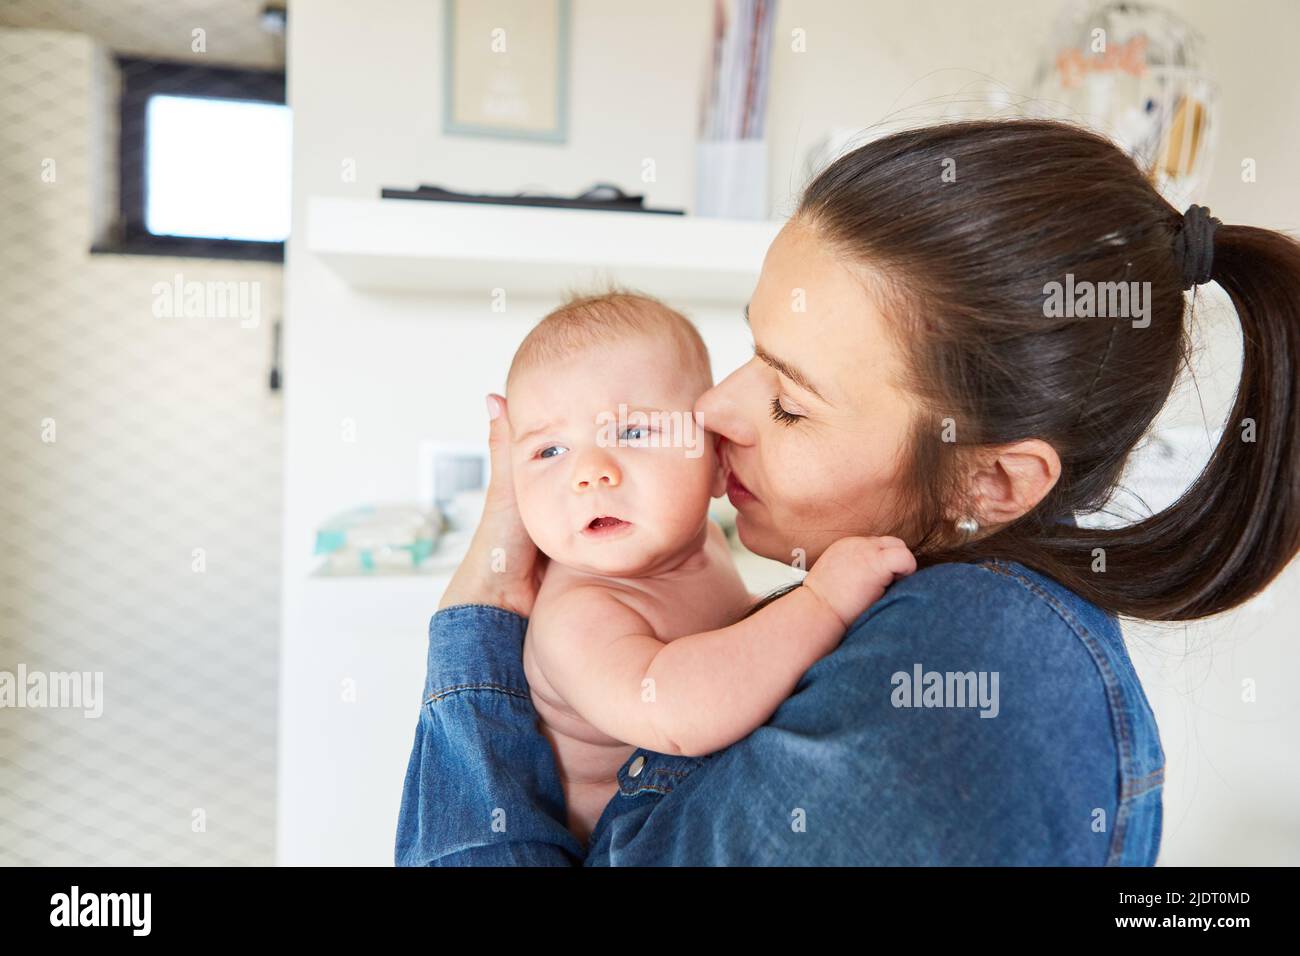 Mother gives her baby a tender kiss on the cheek for affection and motherly love Stock Photo